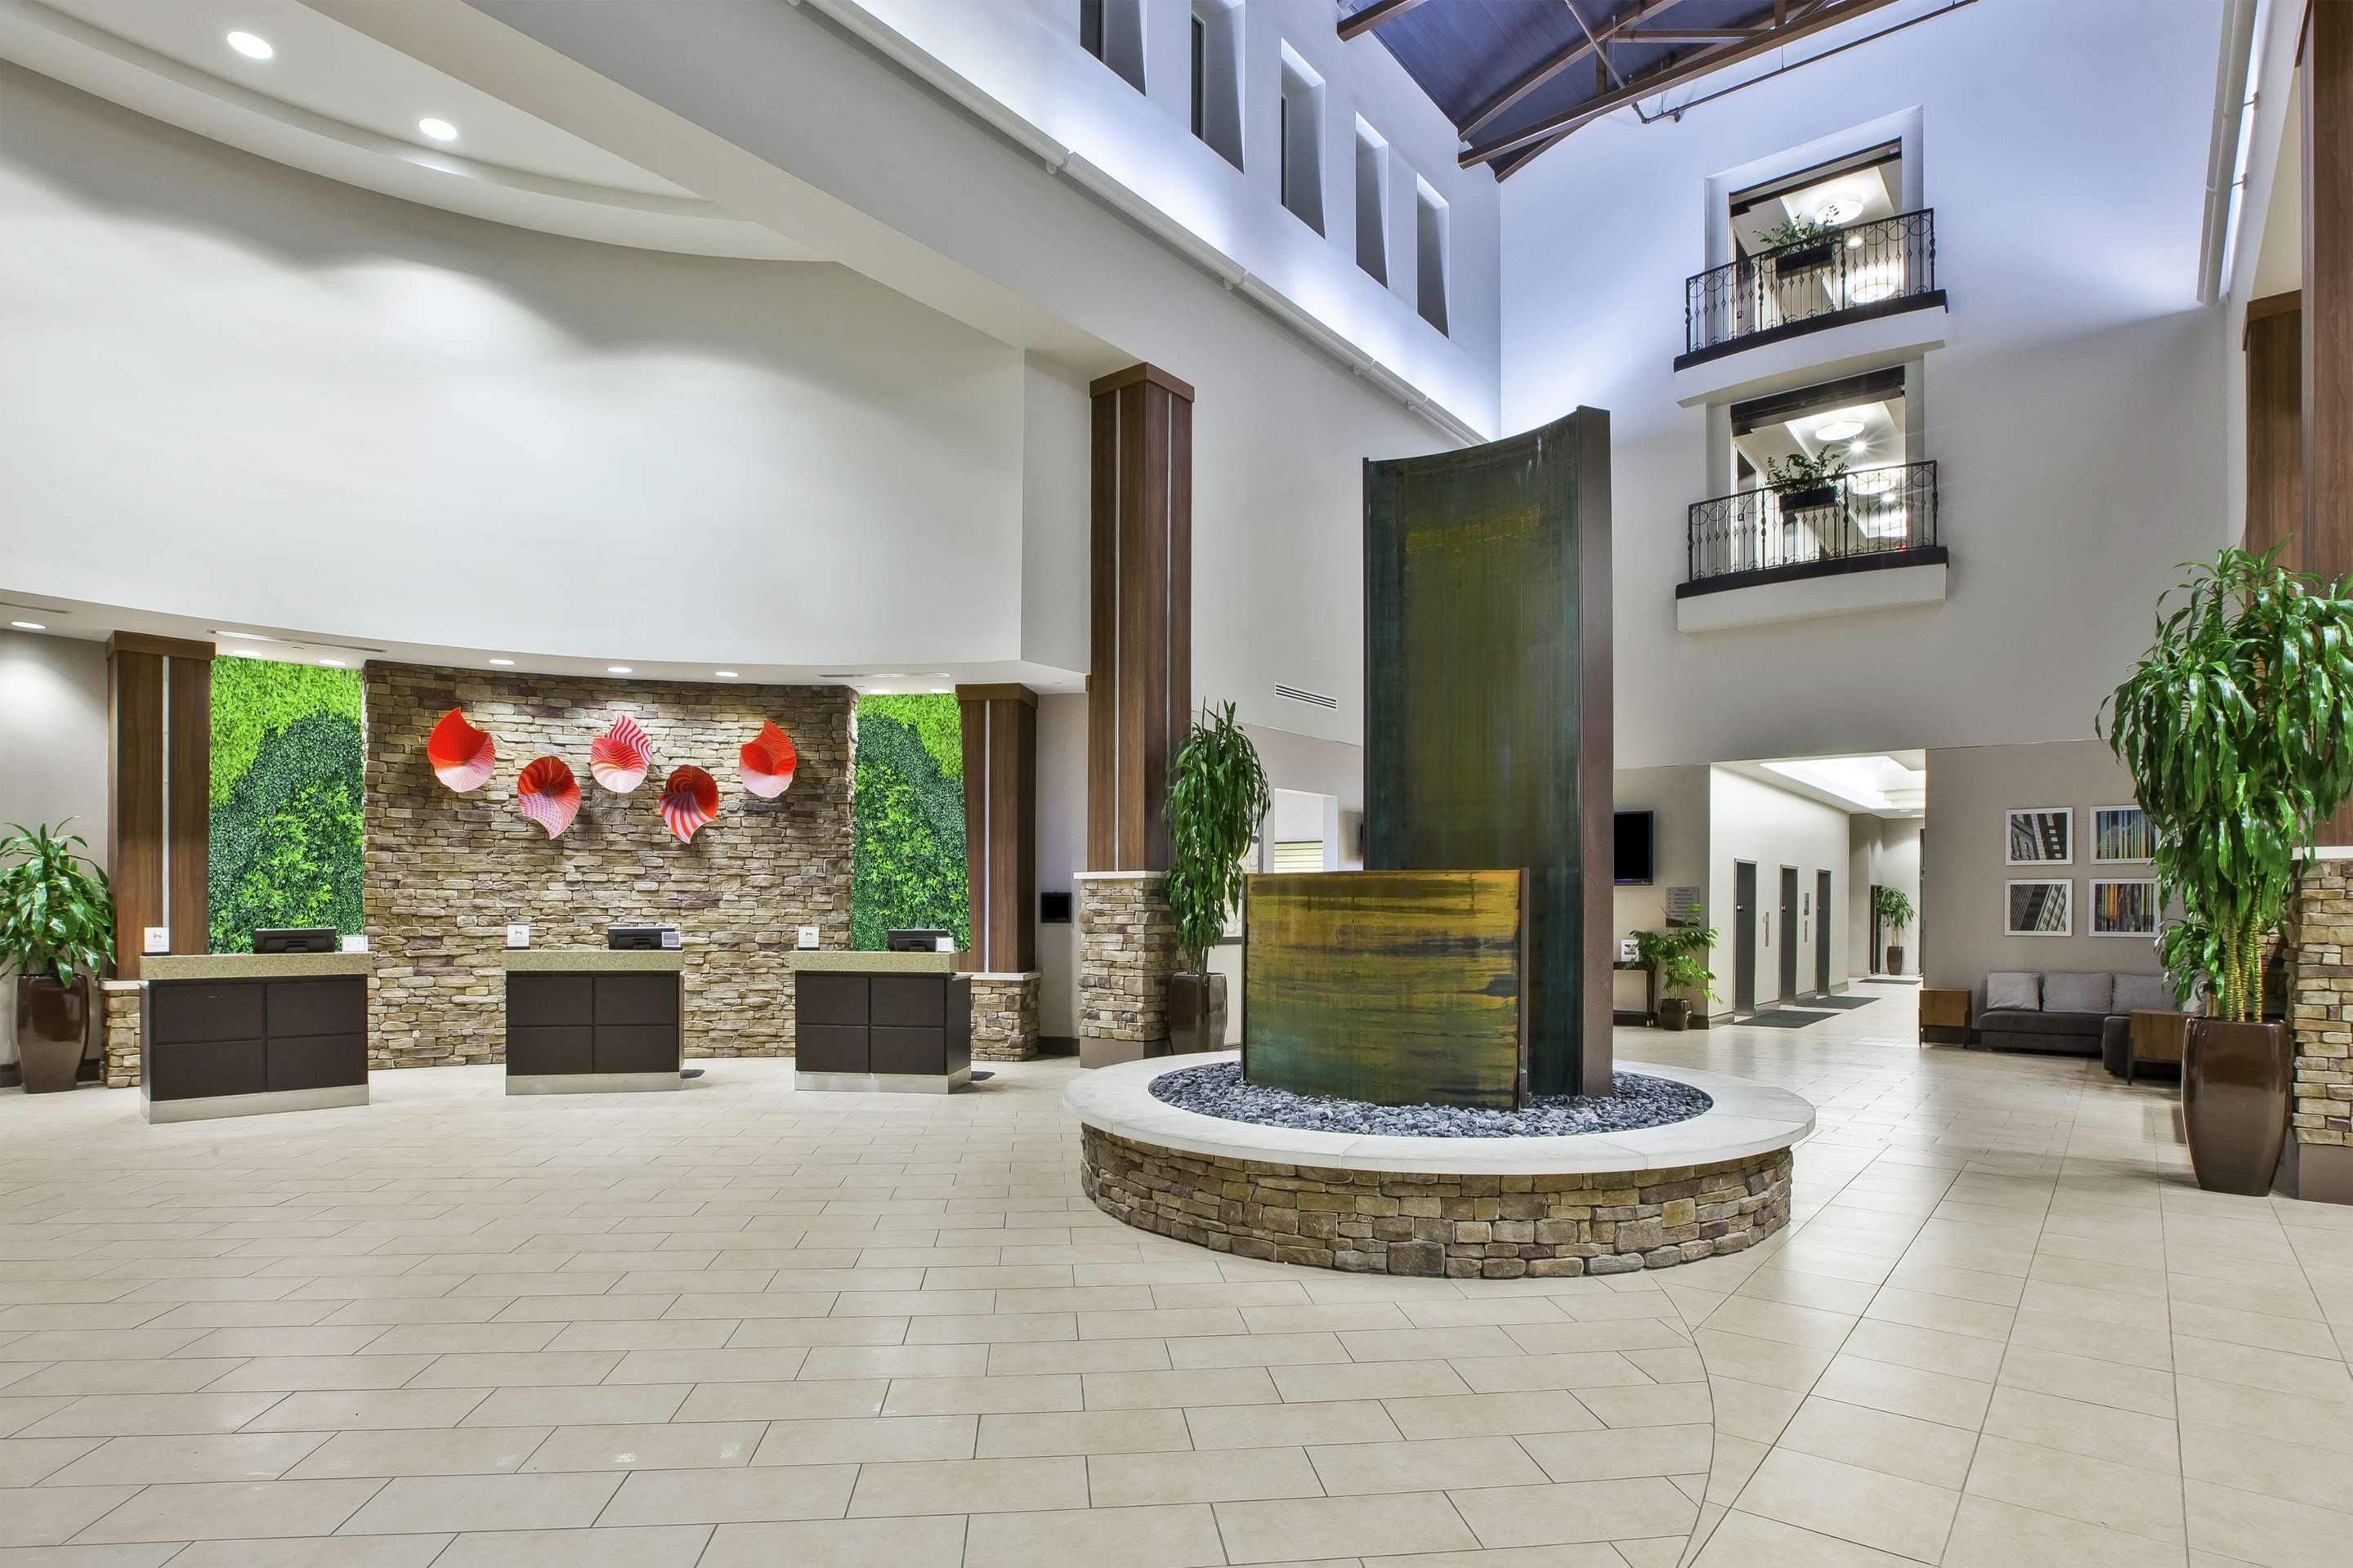 The Best 10 Hotels near Quest Conference Center in Westerville, OH - Yelp